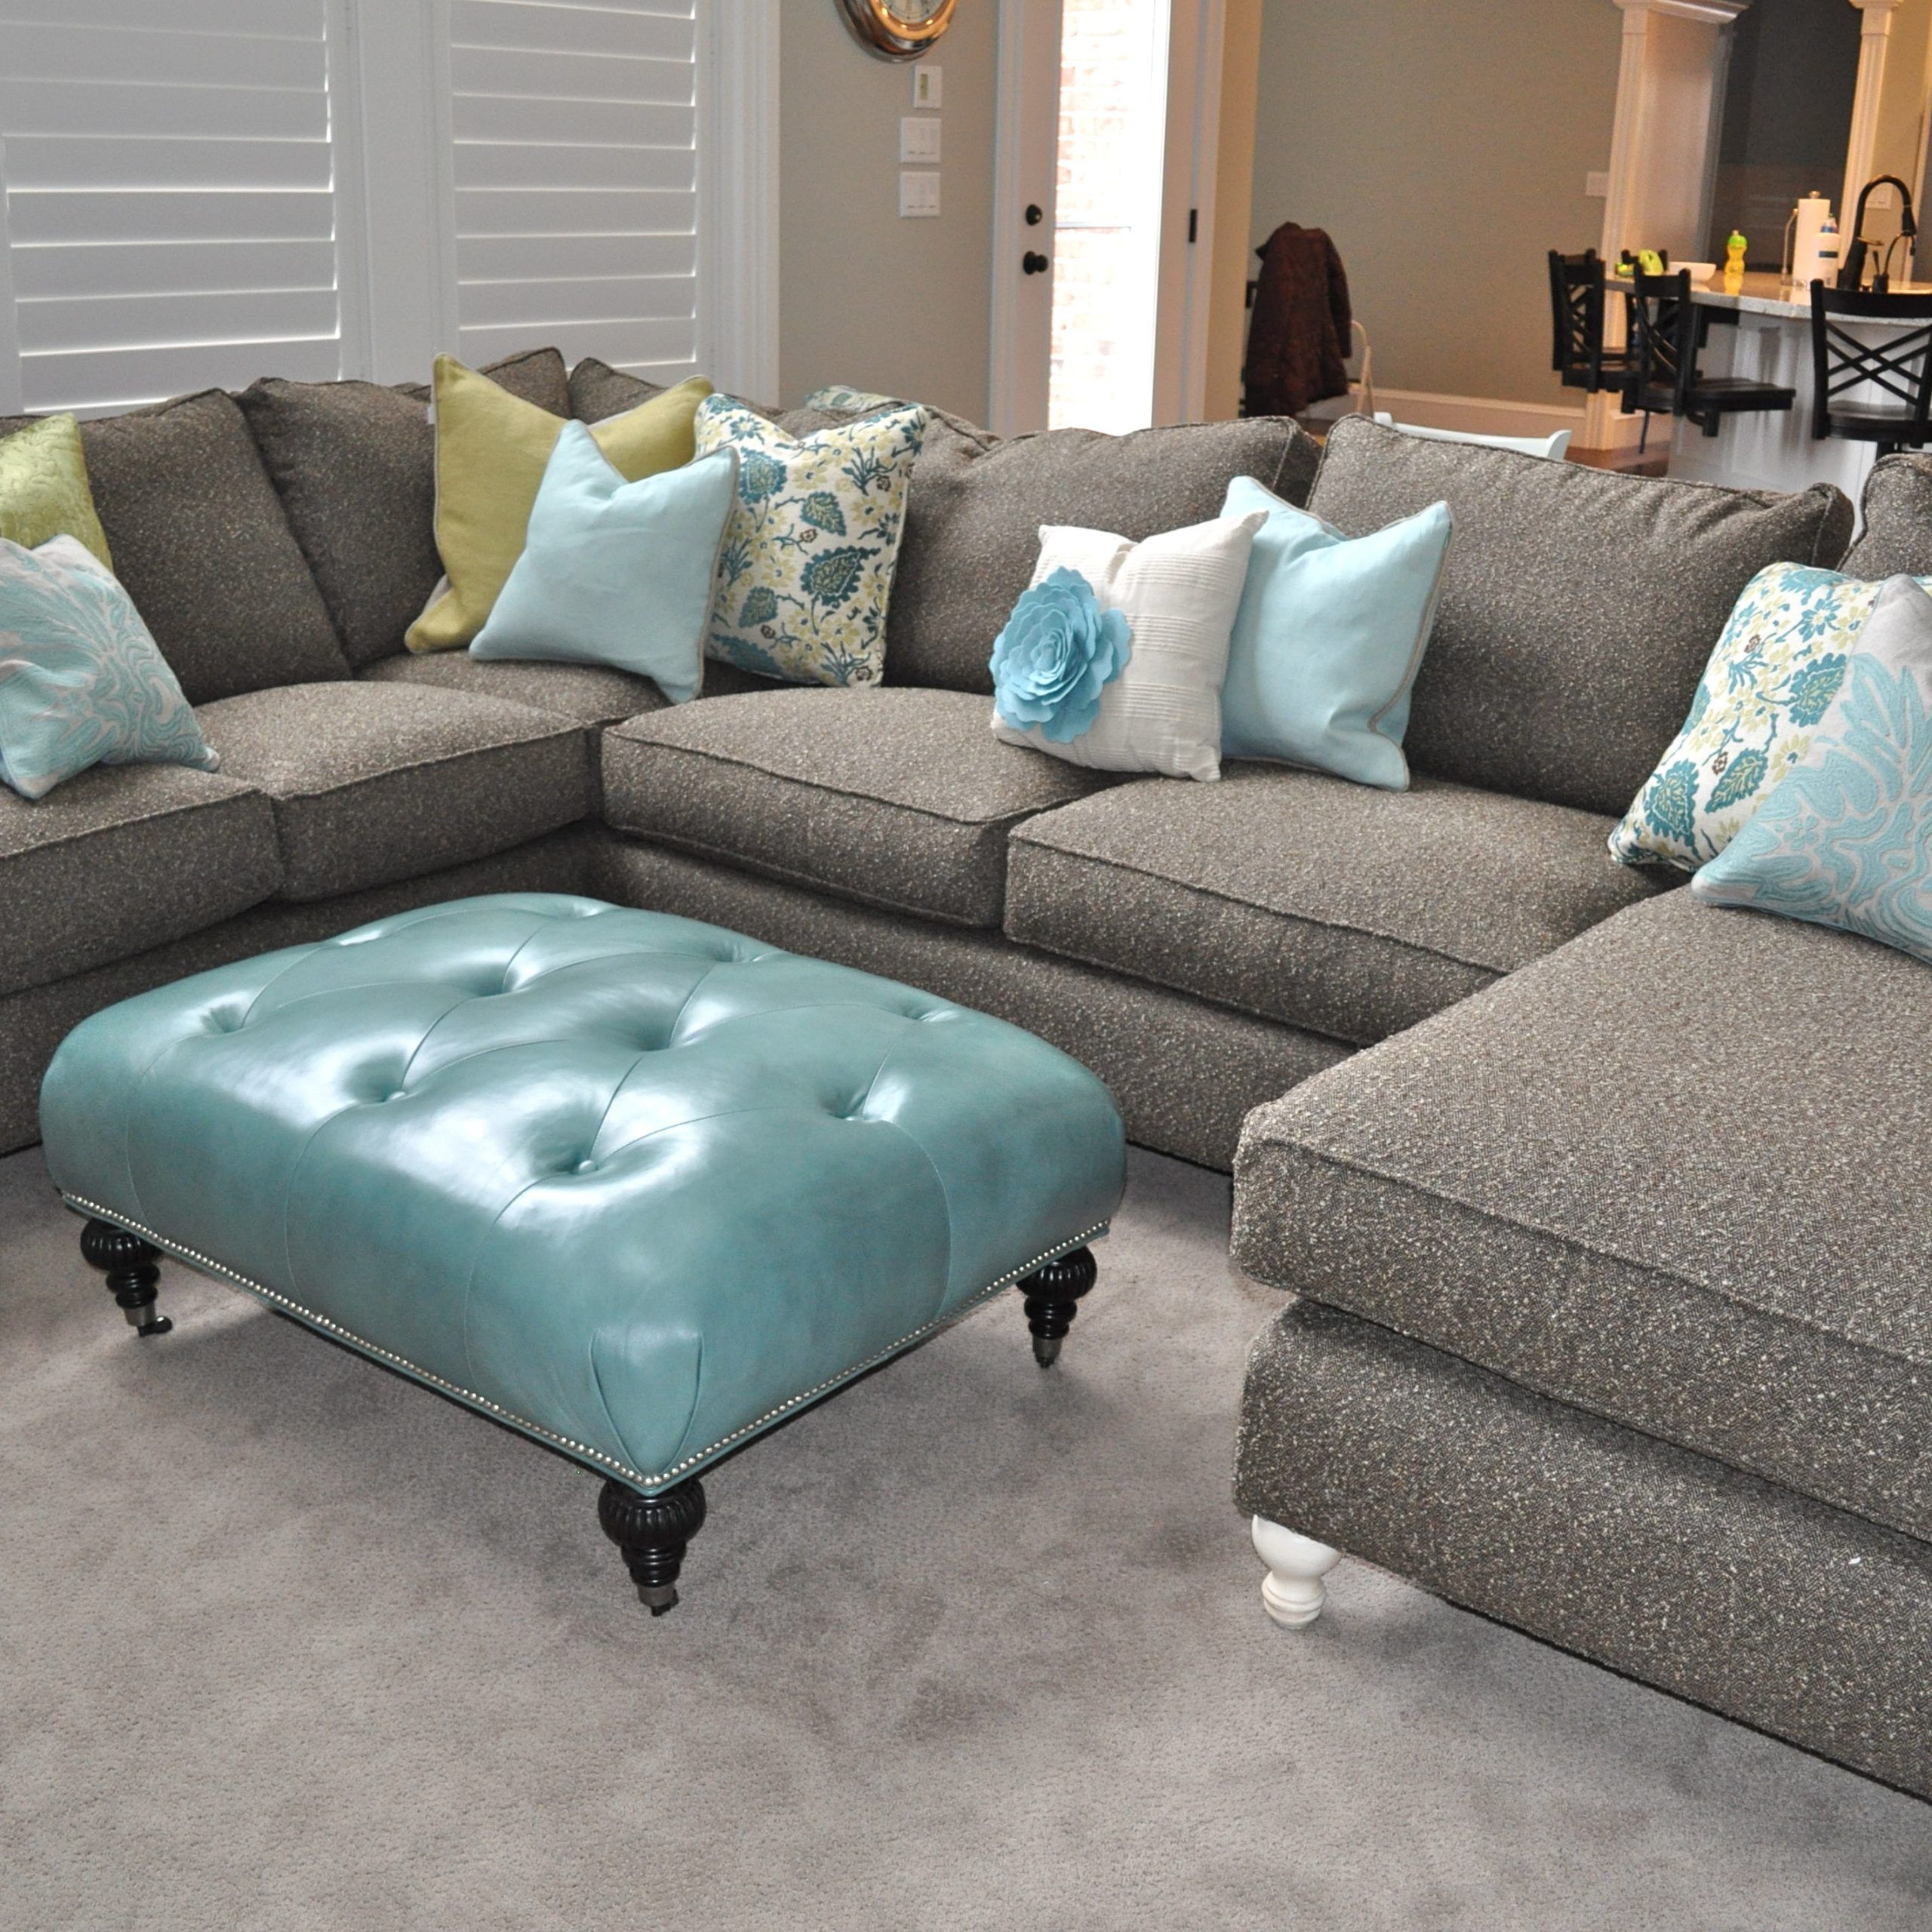 U Shaped Sectional With Chaise Design – Homesfeed Within Modern U Shape Sectional Sofas In Gray (Gallery 7 of 20)